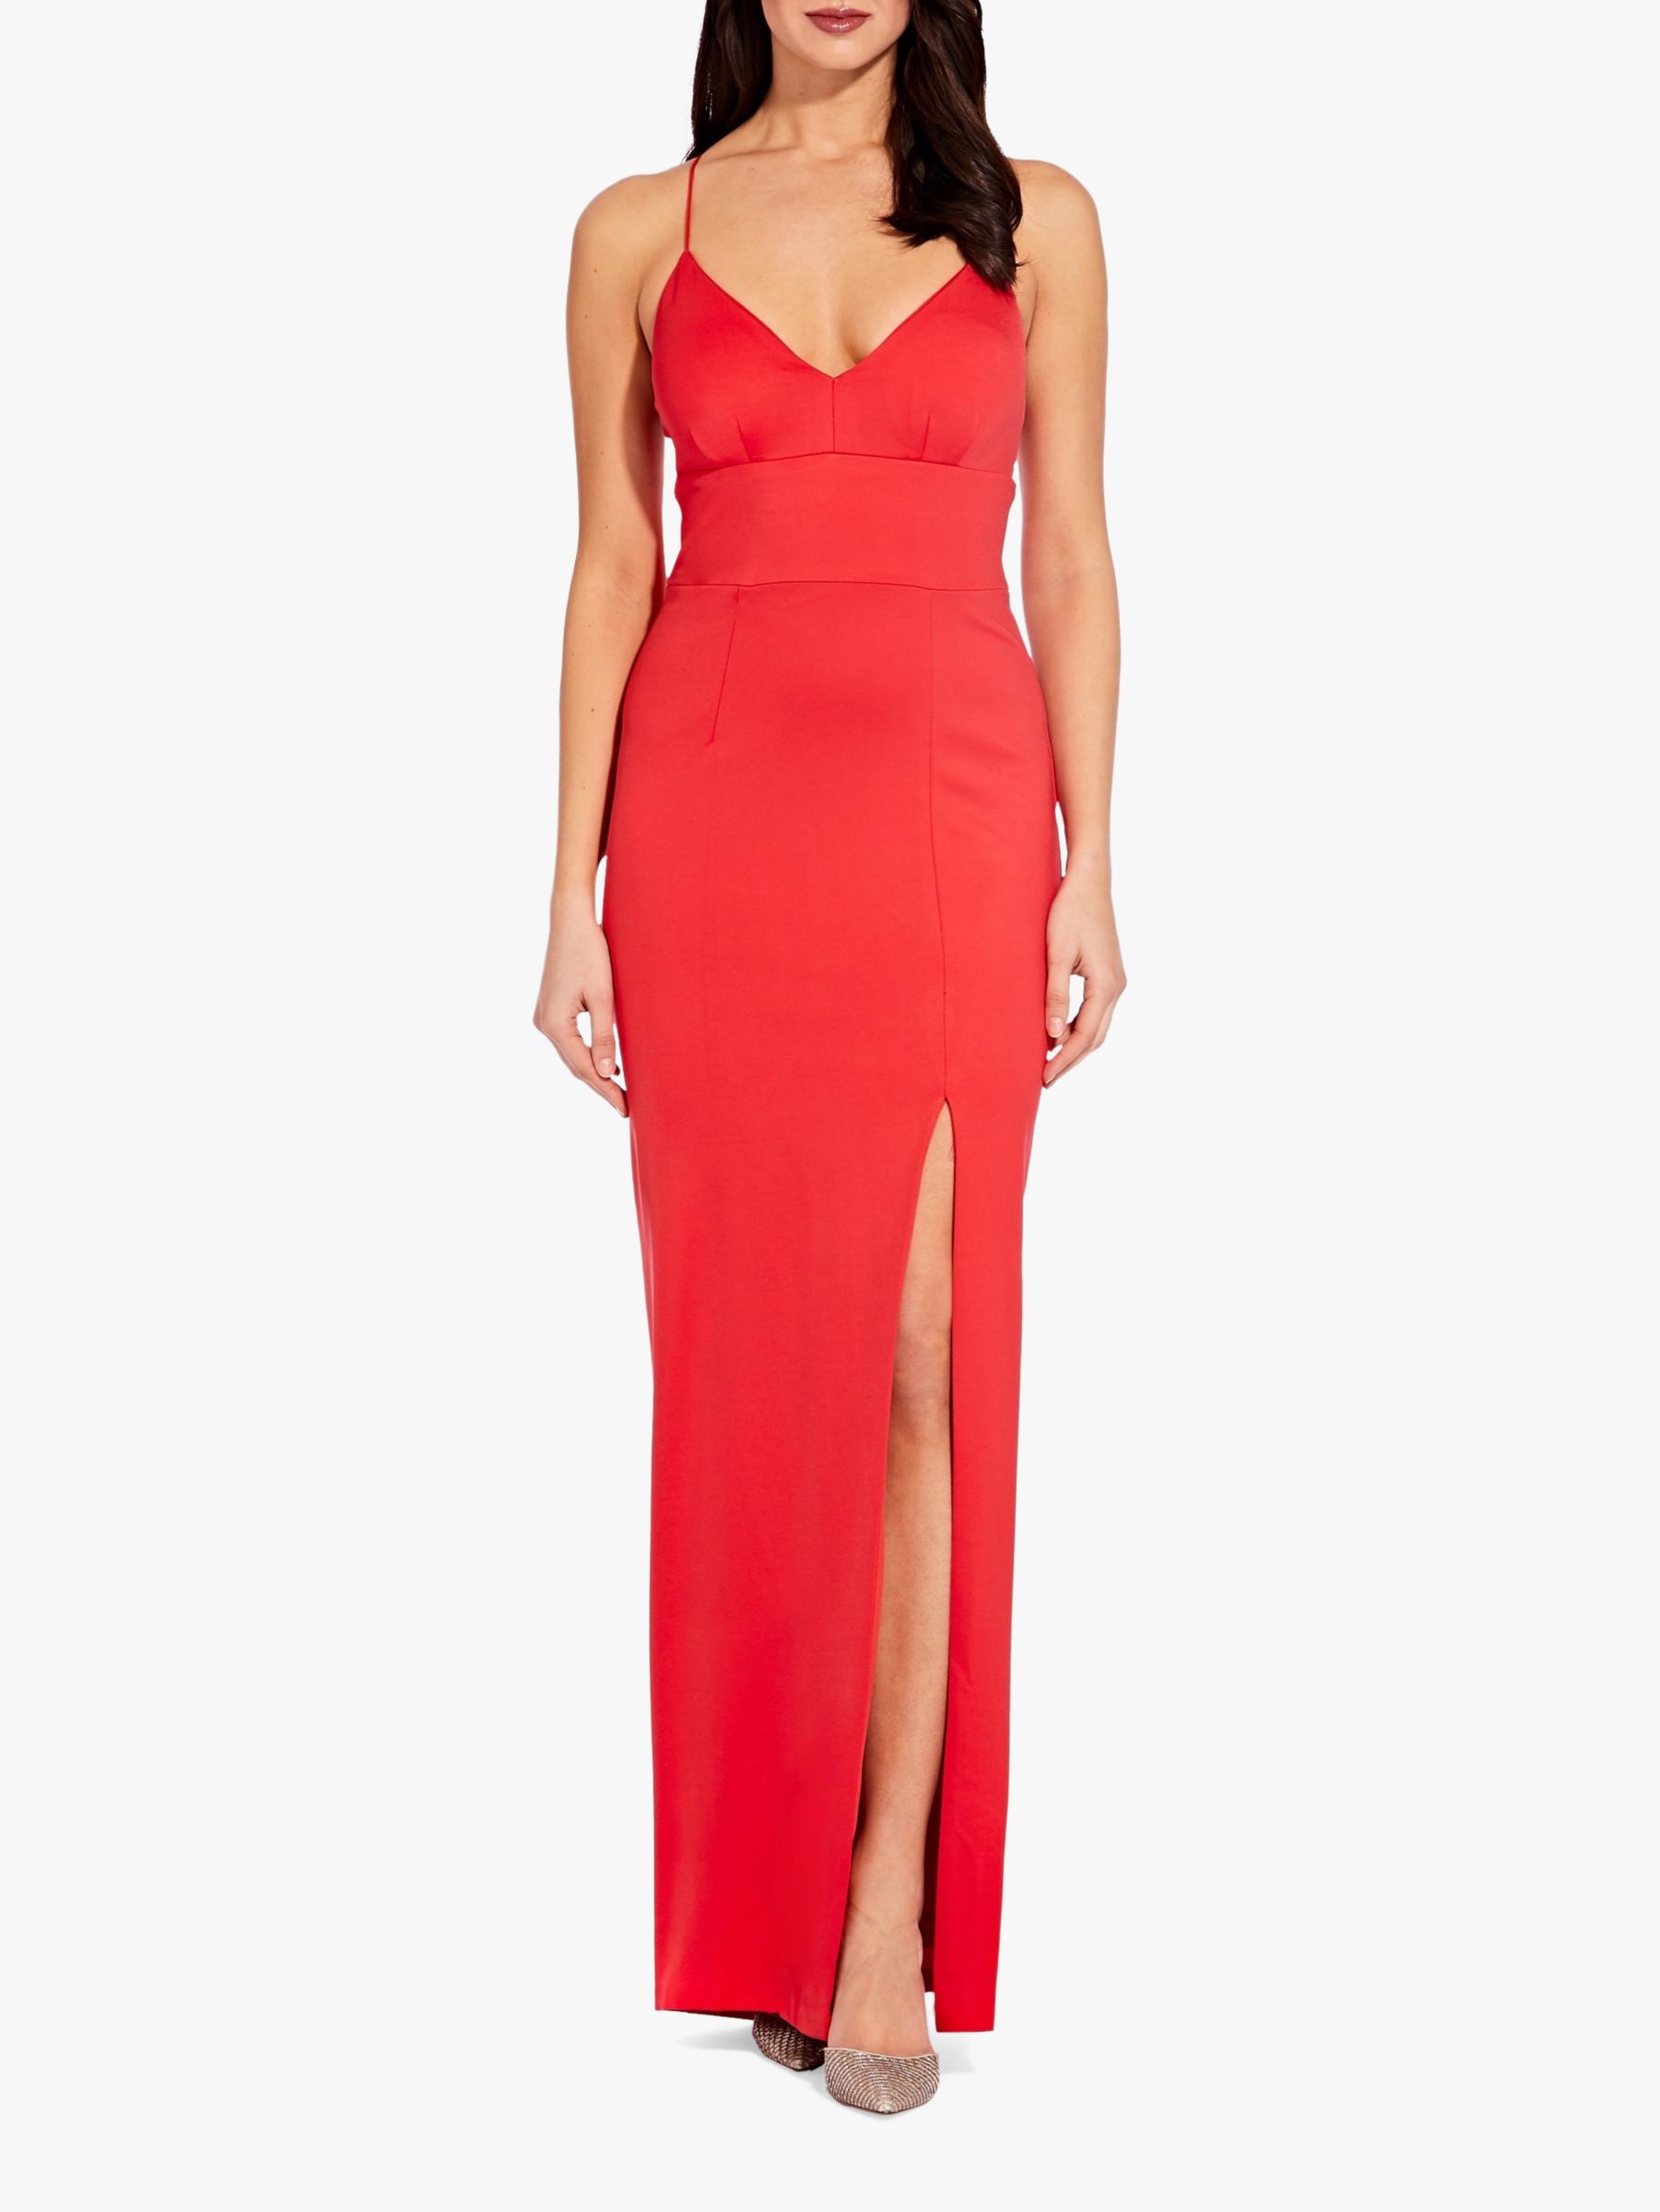 adrianna papell lola jersey gown